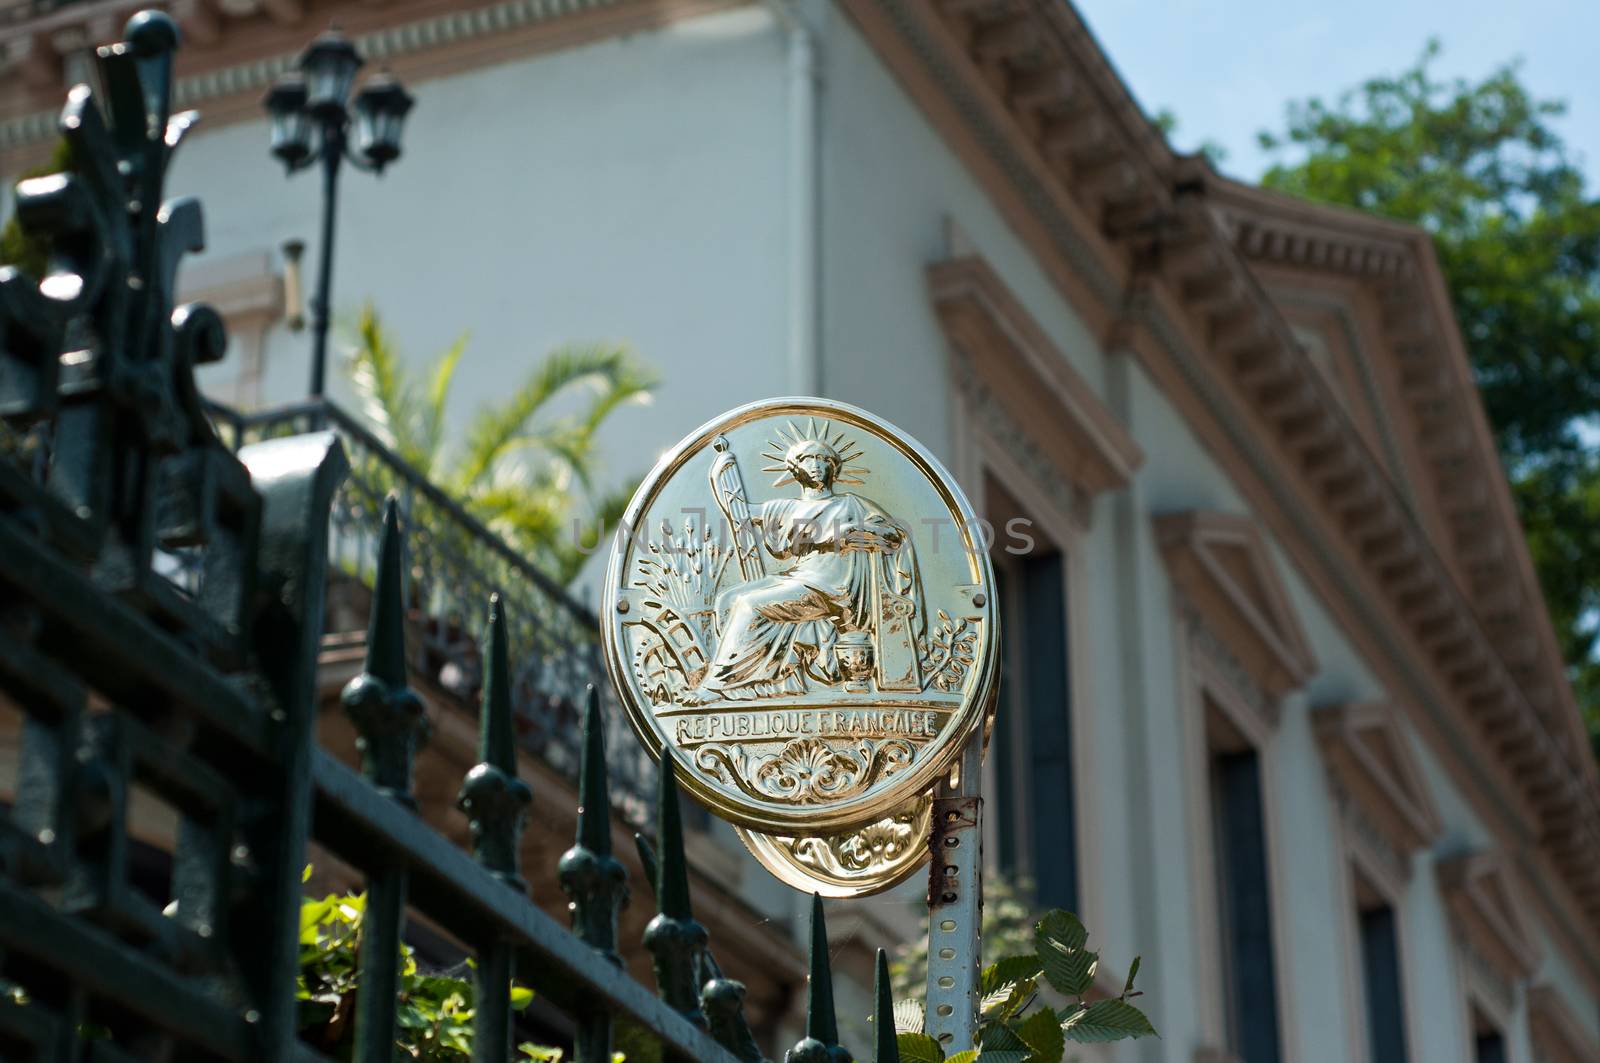 sign of notary in front of building facade